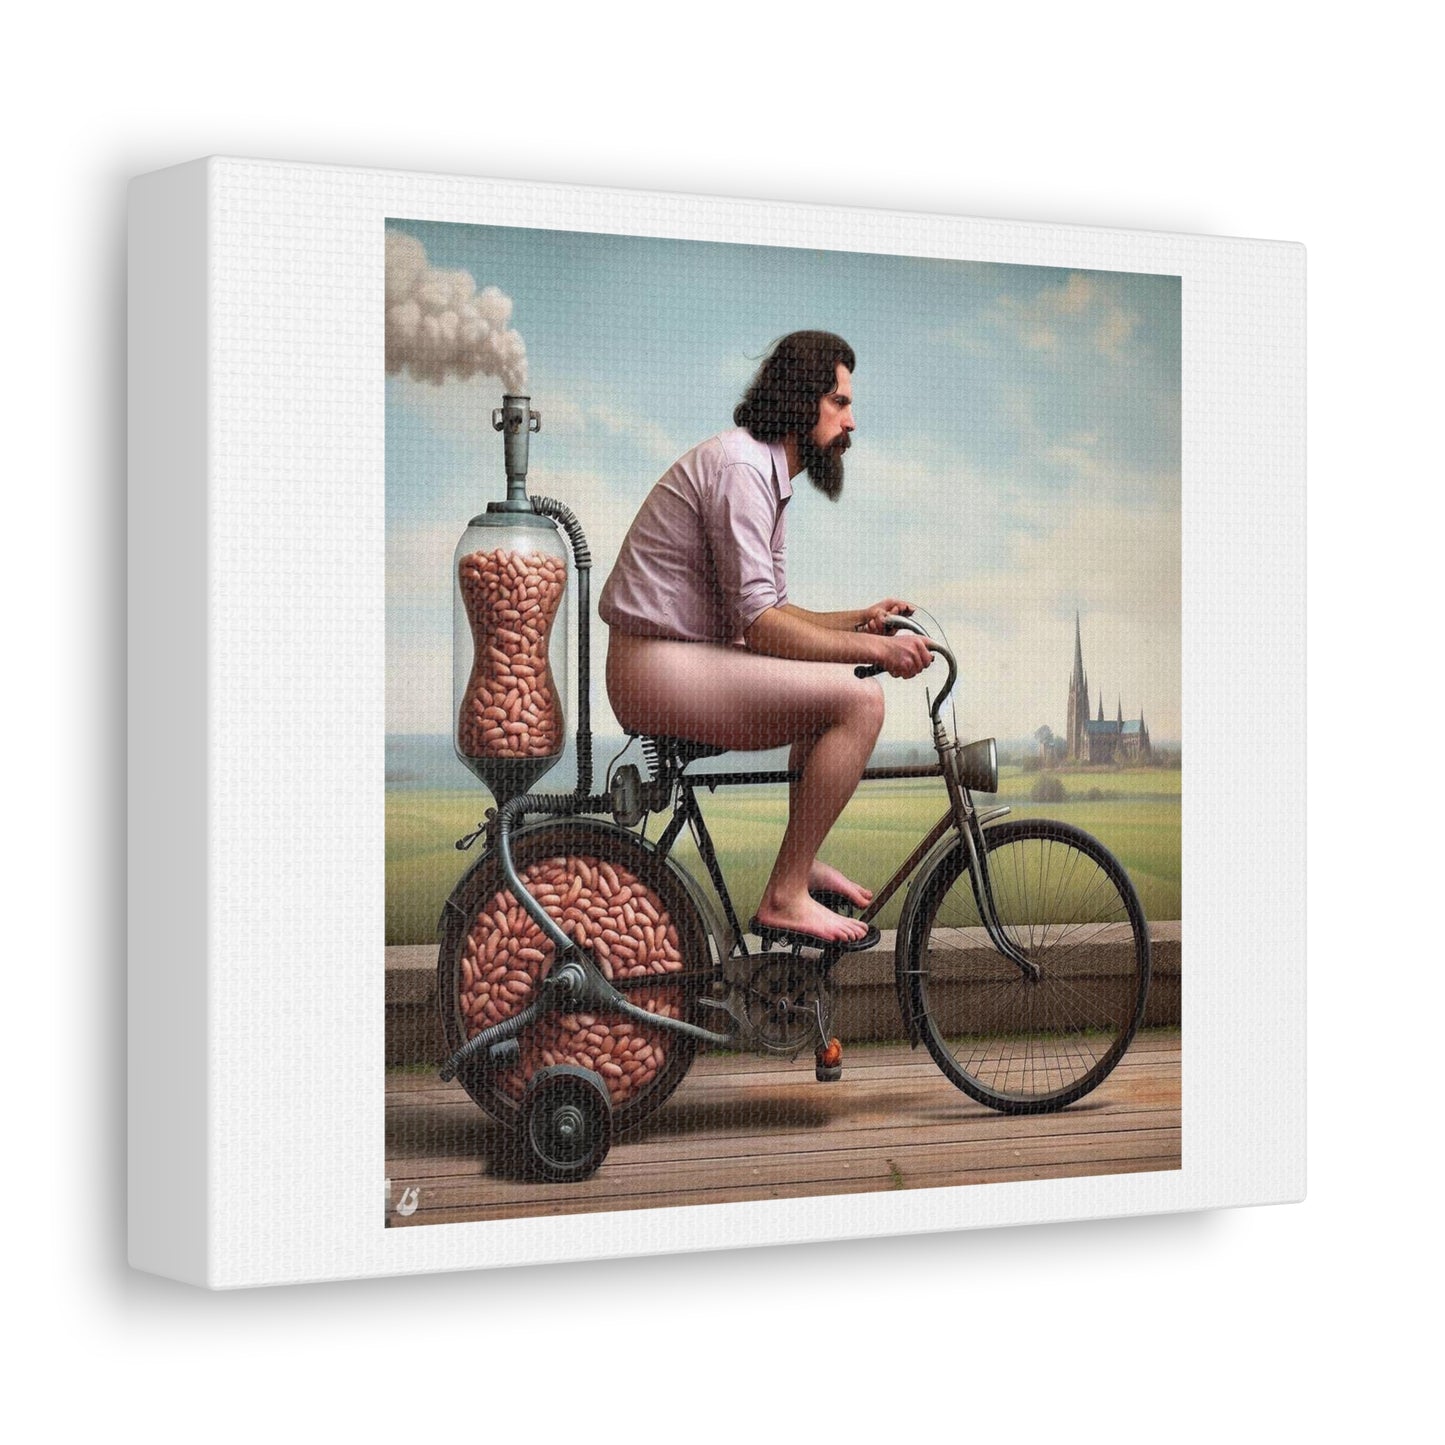 Dr Lars Fincter and His Human Gas Powered Vehicle 'Designed by AI' Art Print on Canvas